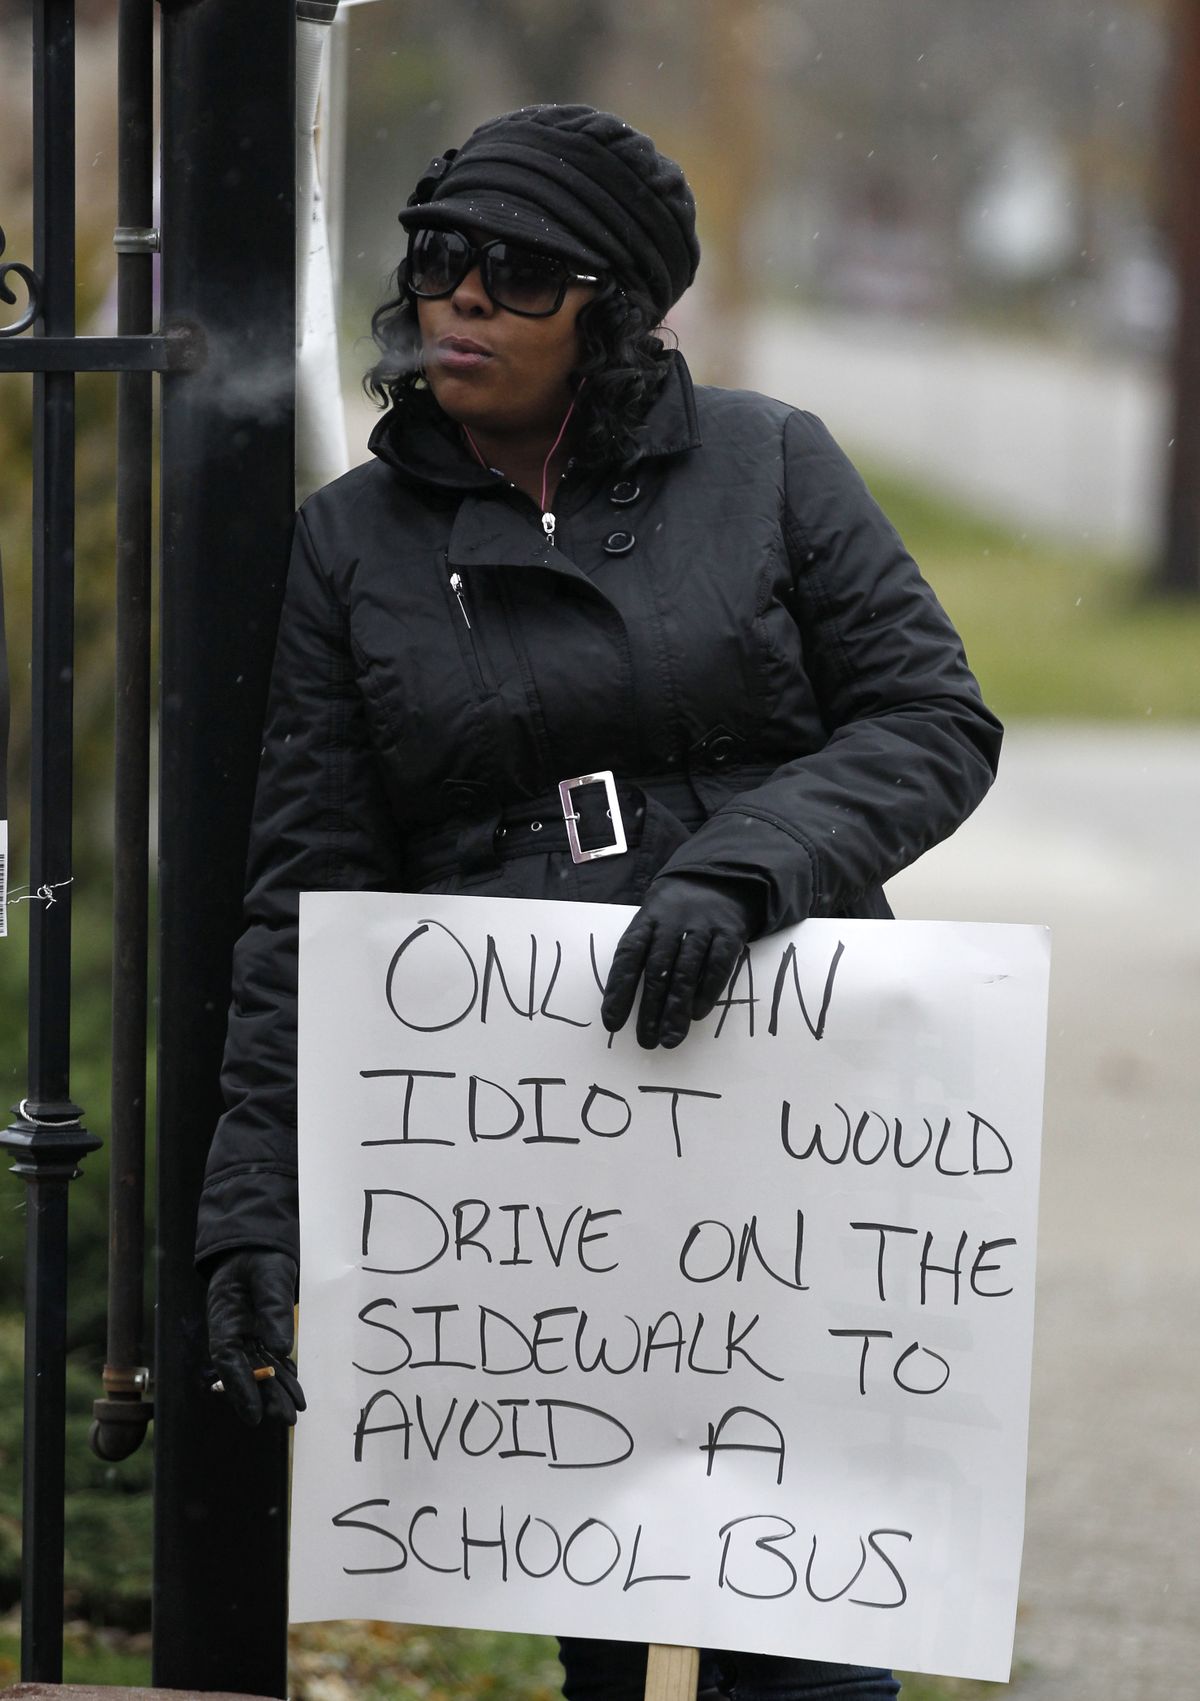 Shena Hardin smokes a cigarette as she holds up a sign to serve a highly public sentence Tuesday, Nov. 13, 2012, in Cleveland, for driving on a sidewalk to avoid a Cleveland school bus that was unloading children. A Cleveland Municipal Court judge ordered 32-year-old Hardin to serve the highly public sentence for one hour Tuesday and Wednesday. (Tony Dejak / Associated Press)